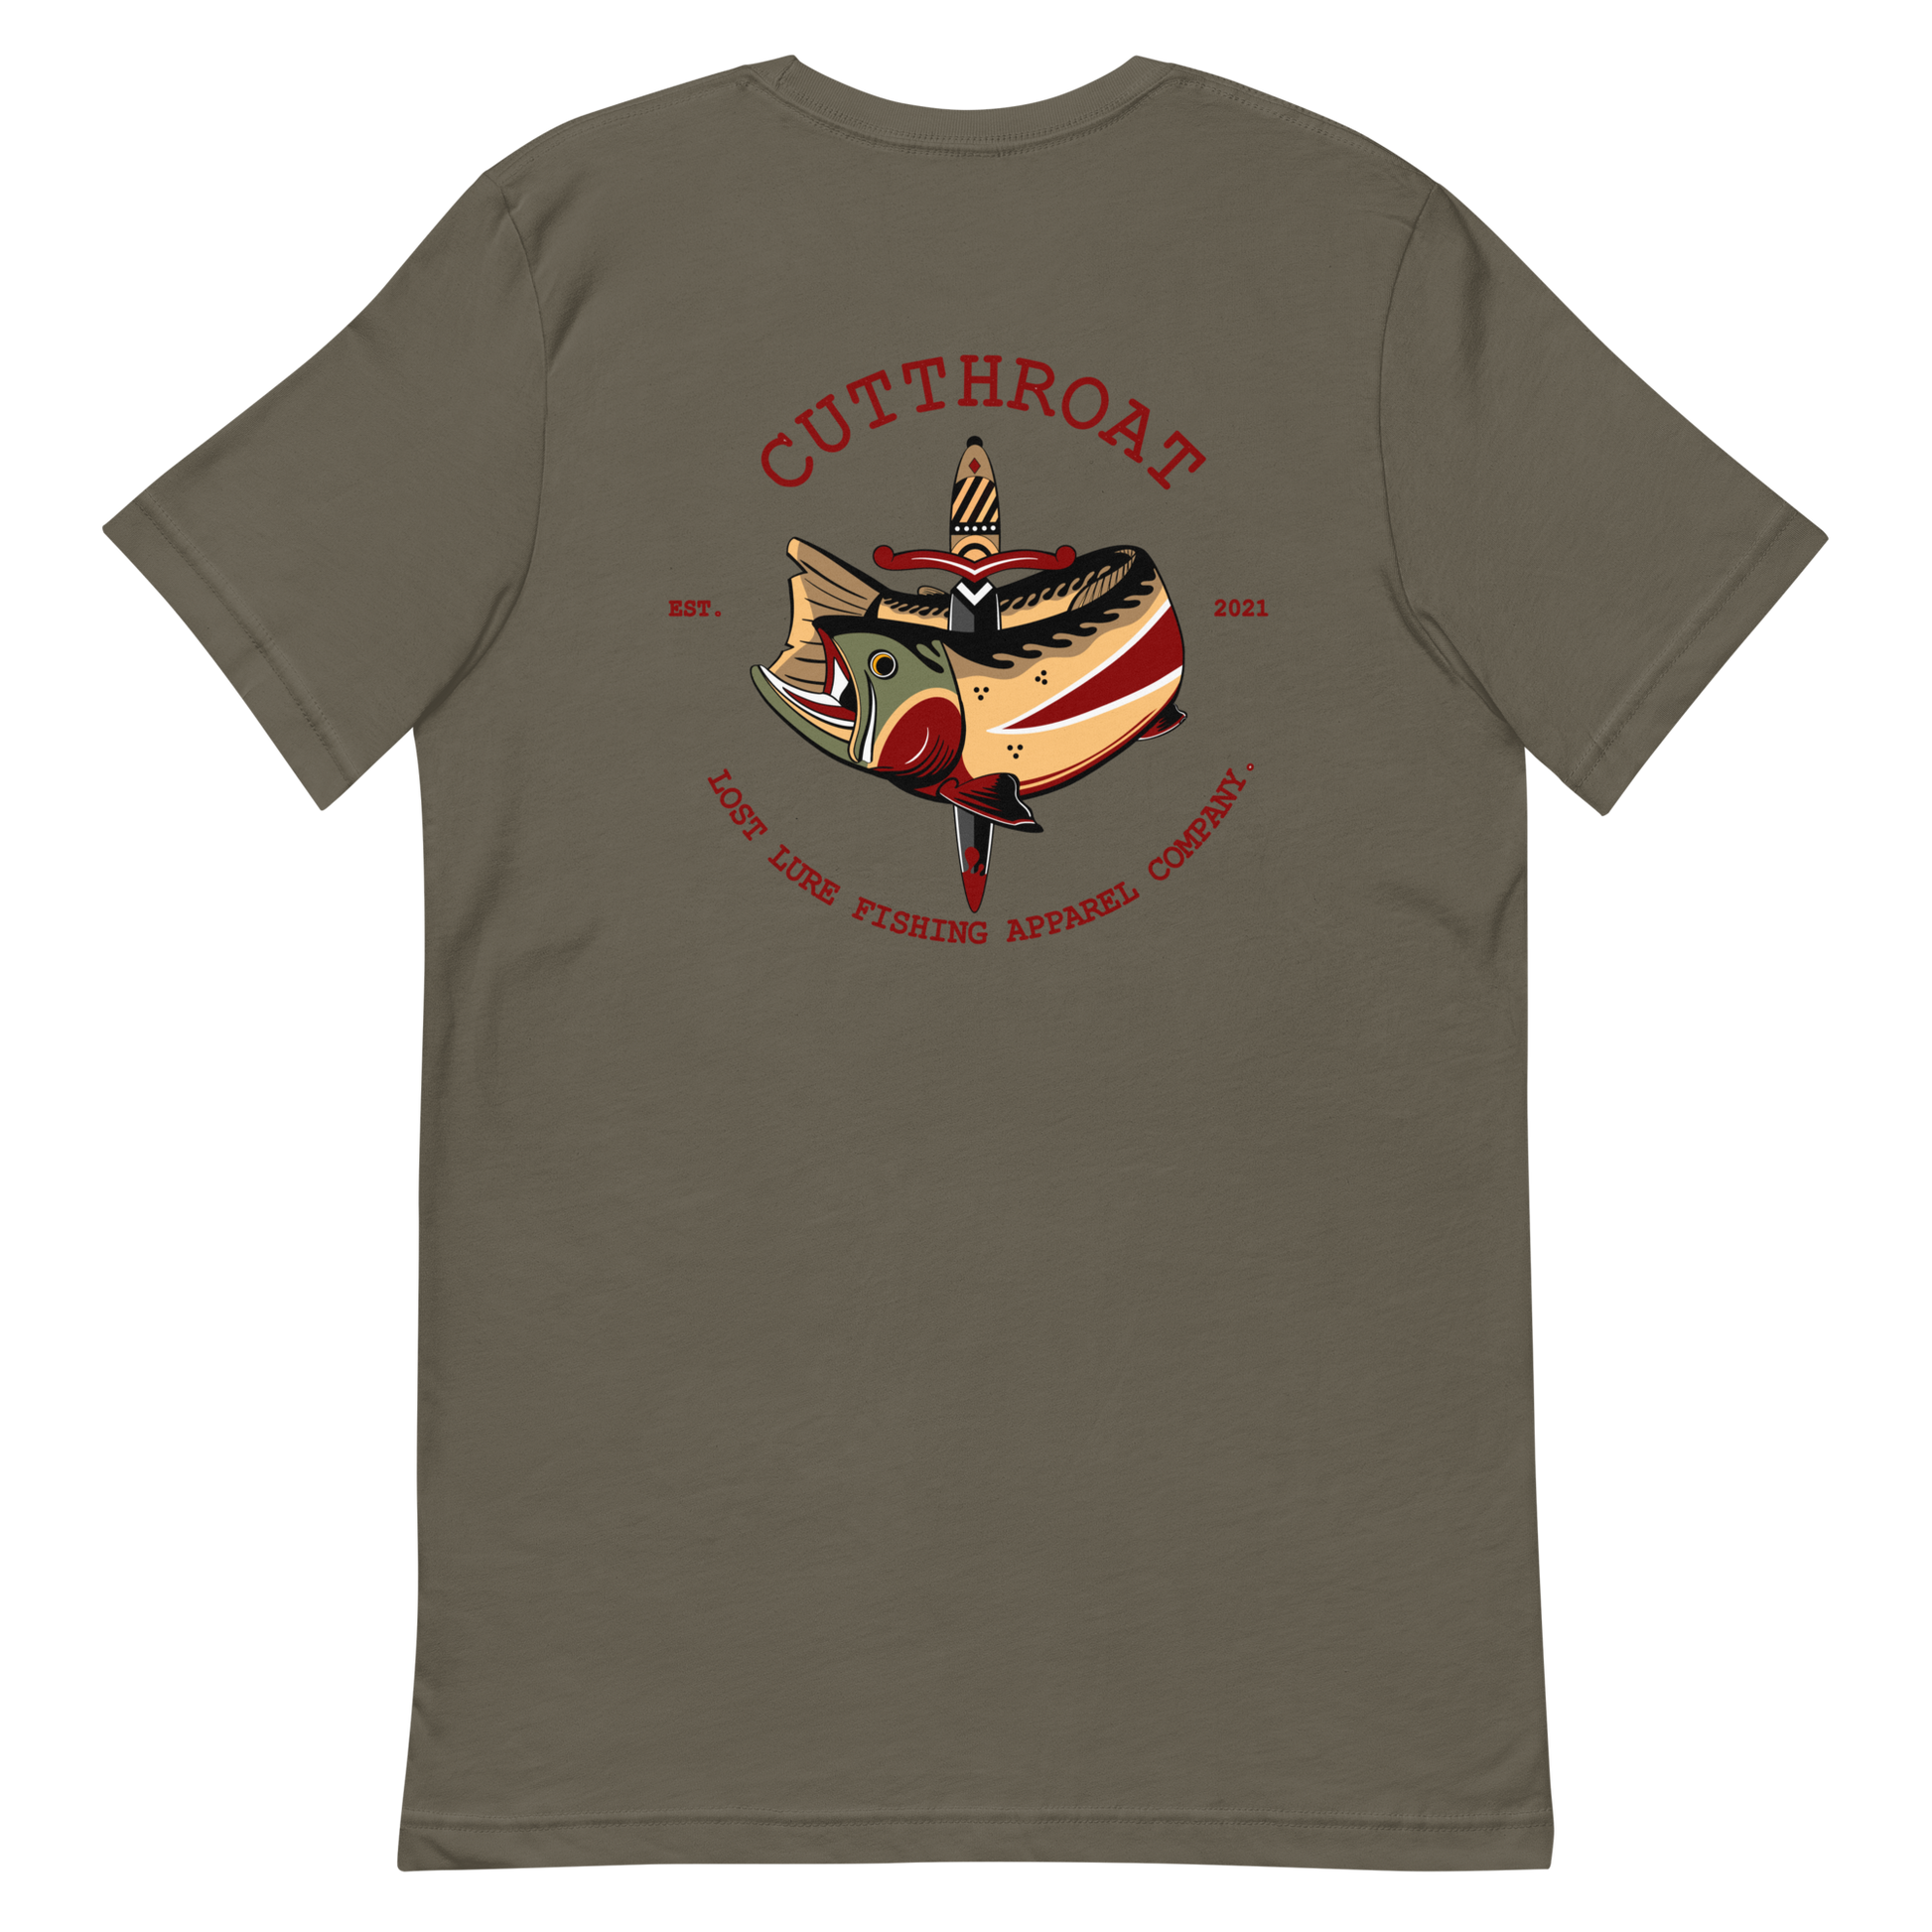 Cutthroat Trout fishing shirt. It’s an American traditional style design with a cutthroat trout and a dagger. The shirt reads Cutthroat trout, est. 2021, lost lure fishing apparel company. The front of the shirt has the lost lure logo. Army green, back side